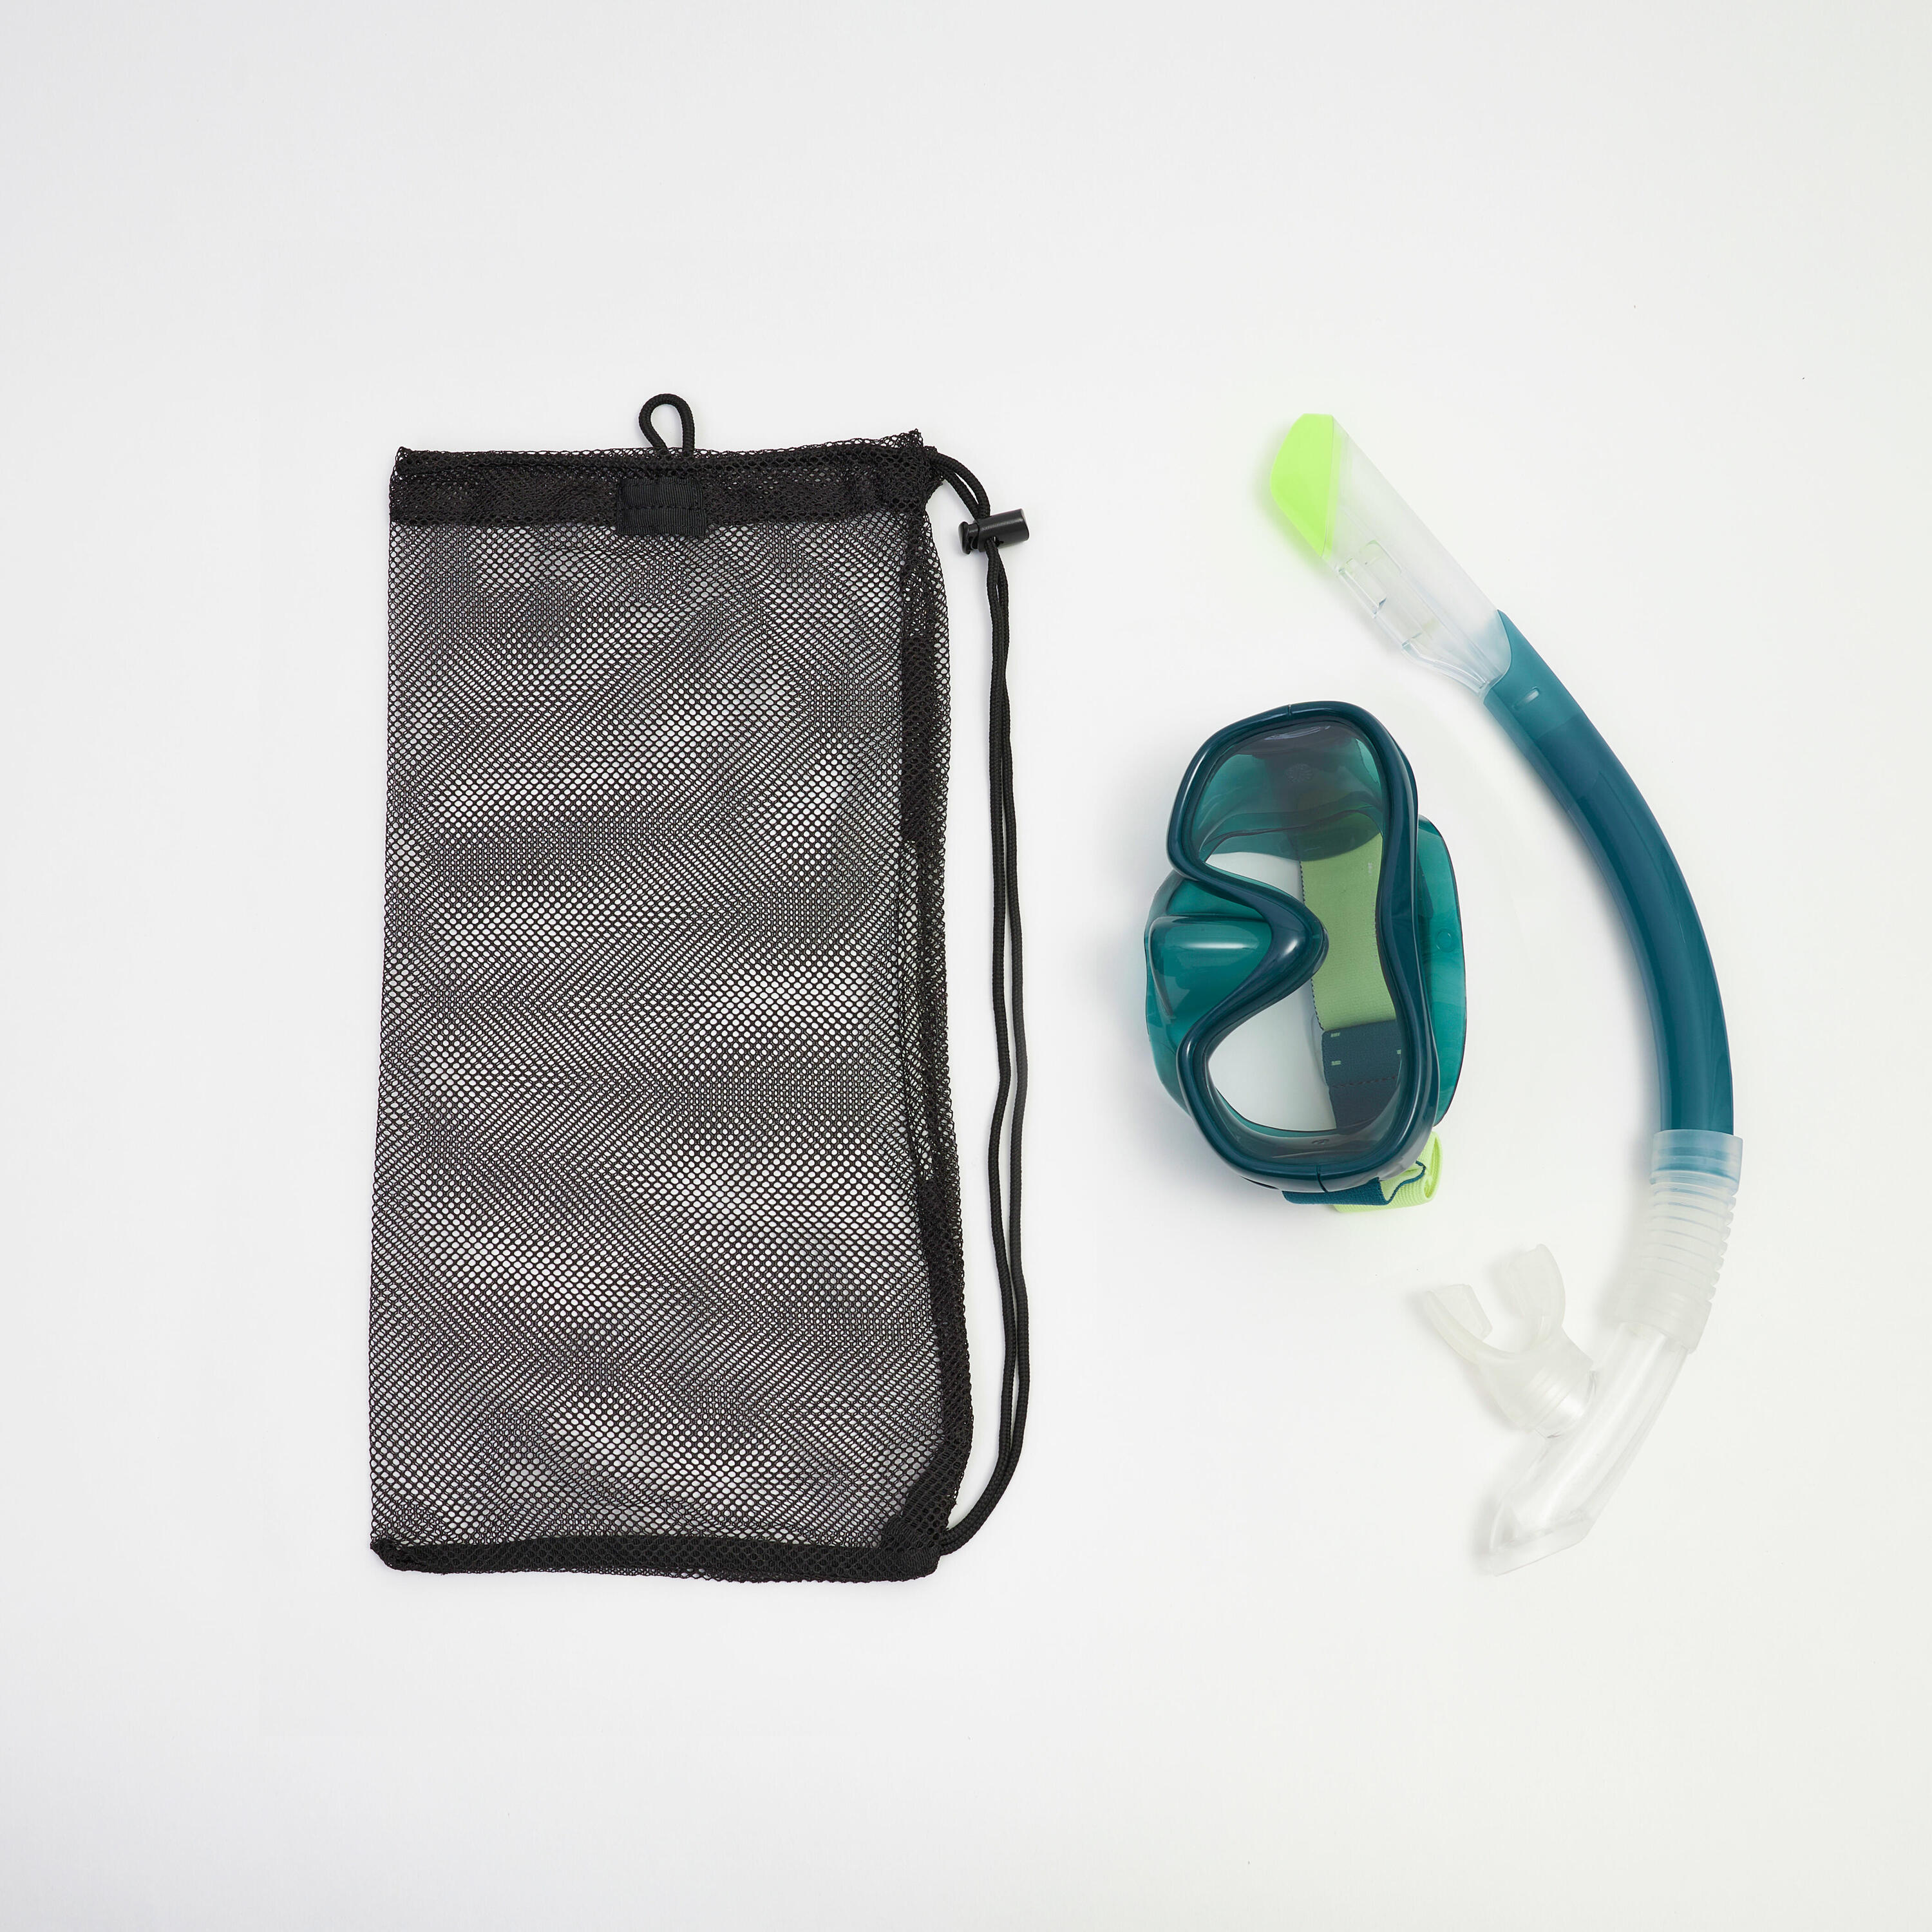 SUBEA Adult snorkelling Kit 100 COMFORT mask and DRYTOP snorkel green with bag